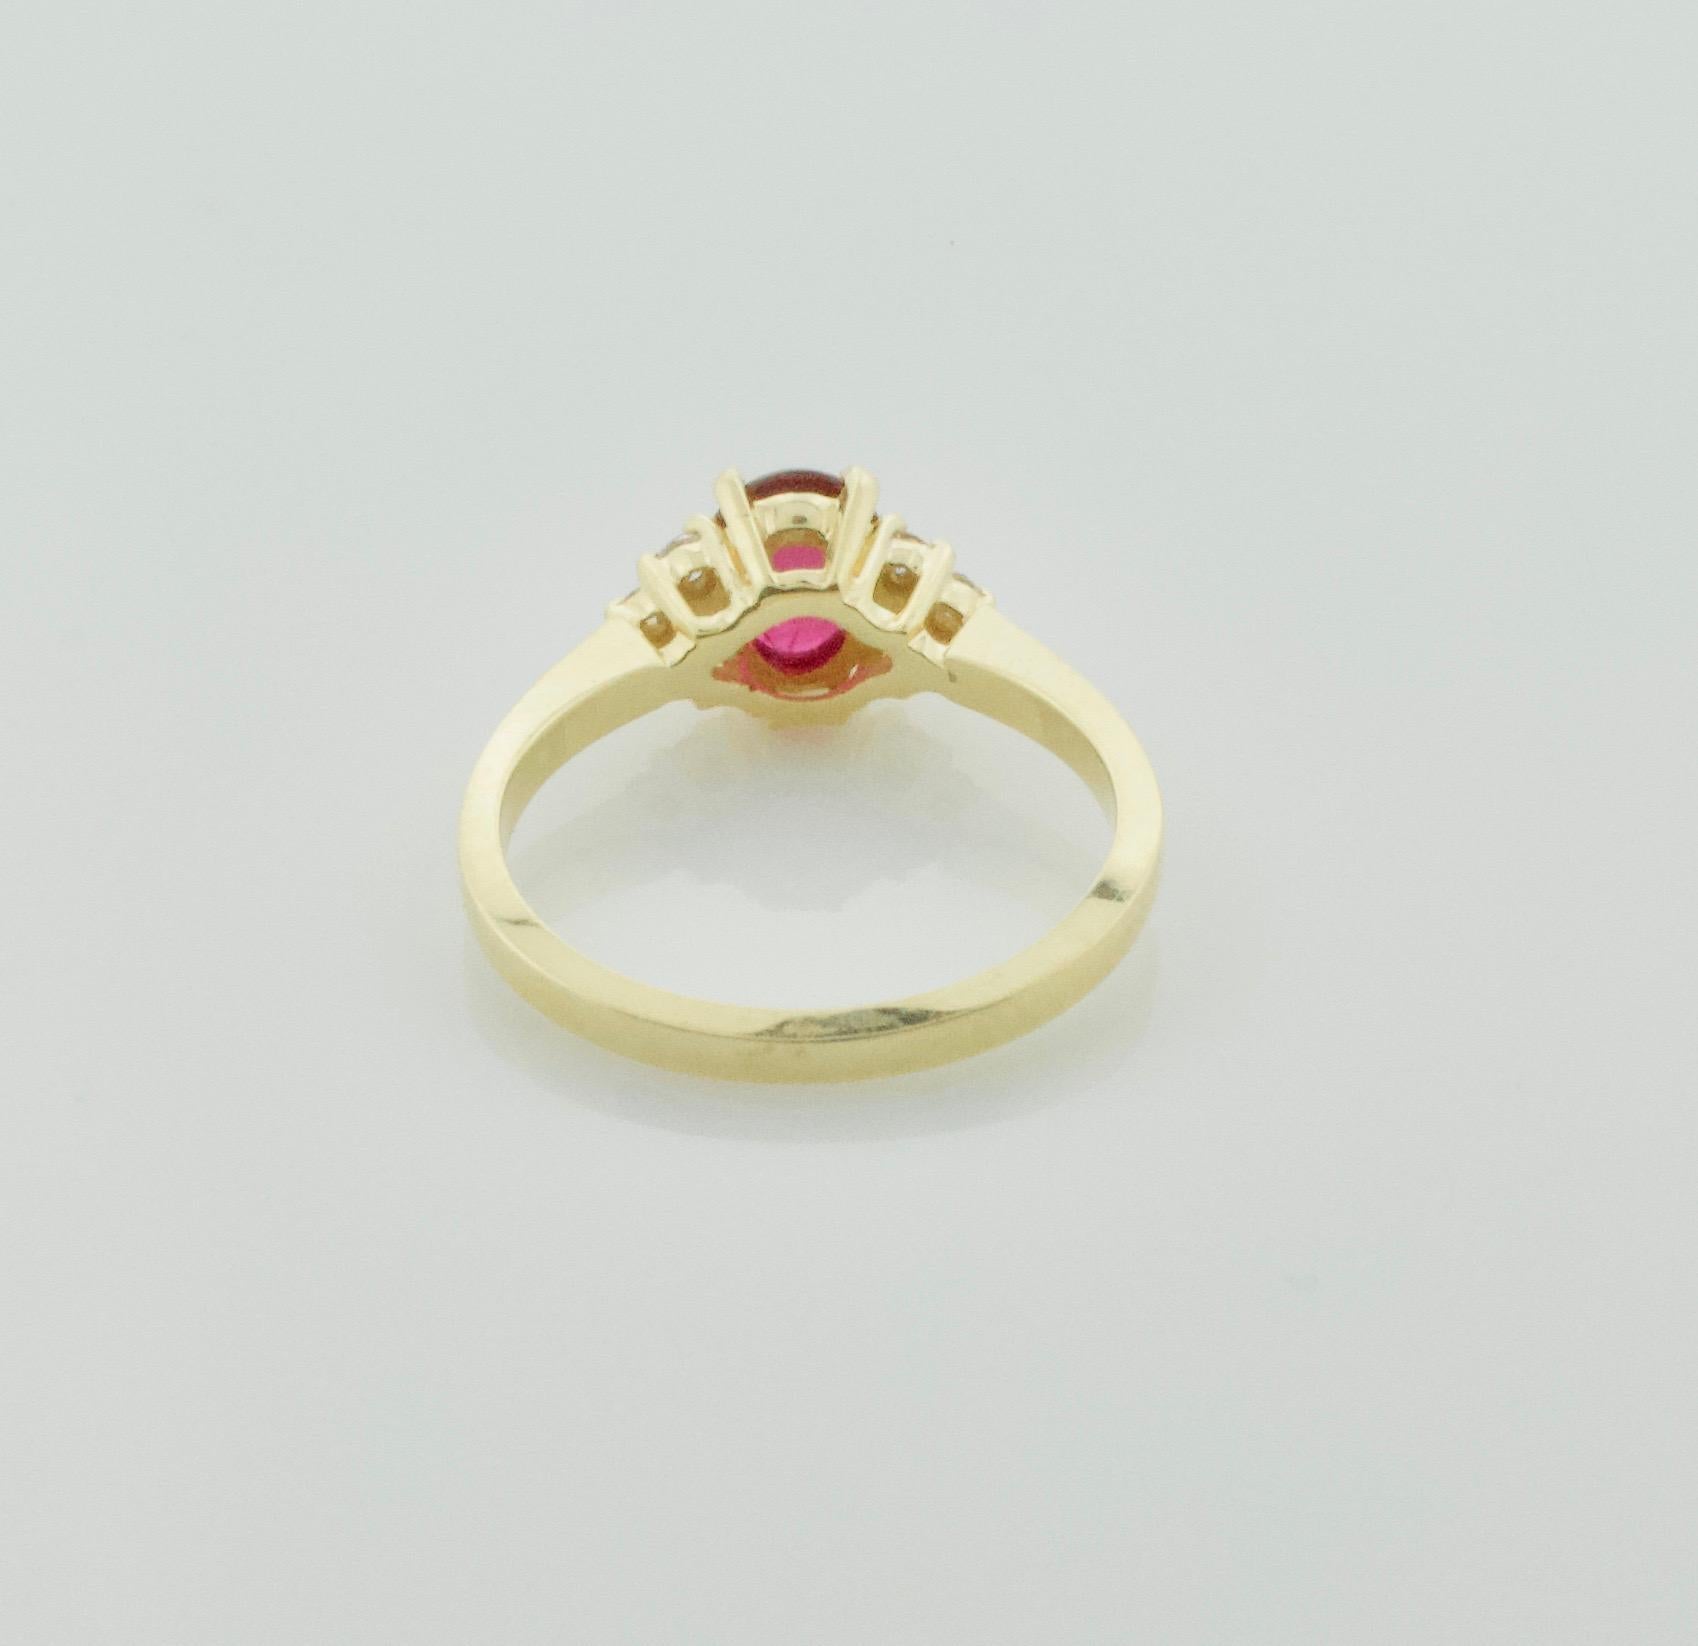 Delightful Cabochon Ruby and Diamond Solitaire Ring in 18 Karat In Excellent Condition For Sale In Wailea, HI